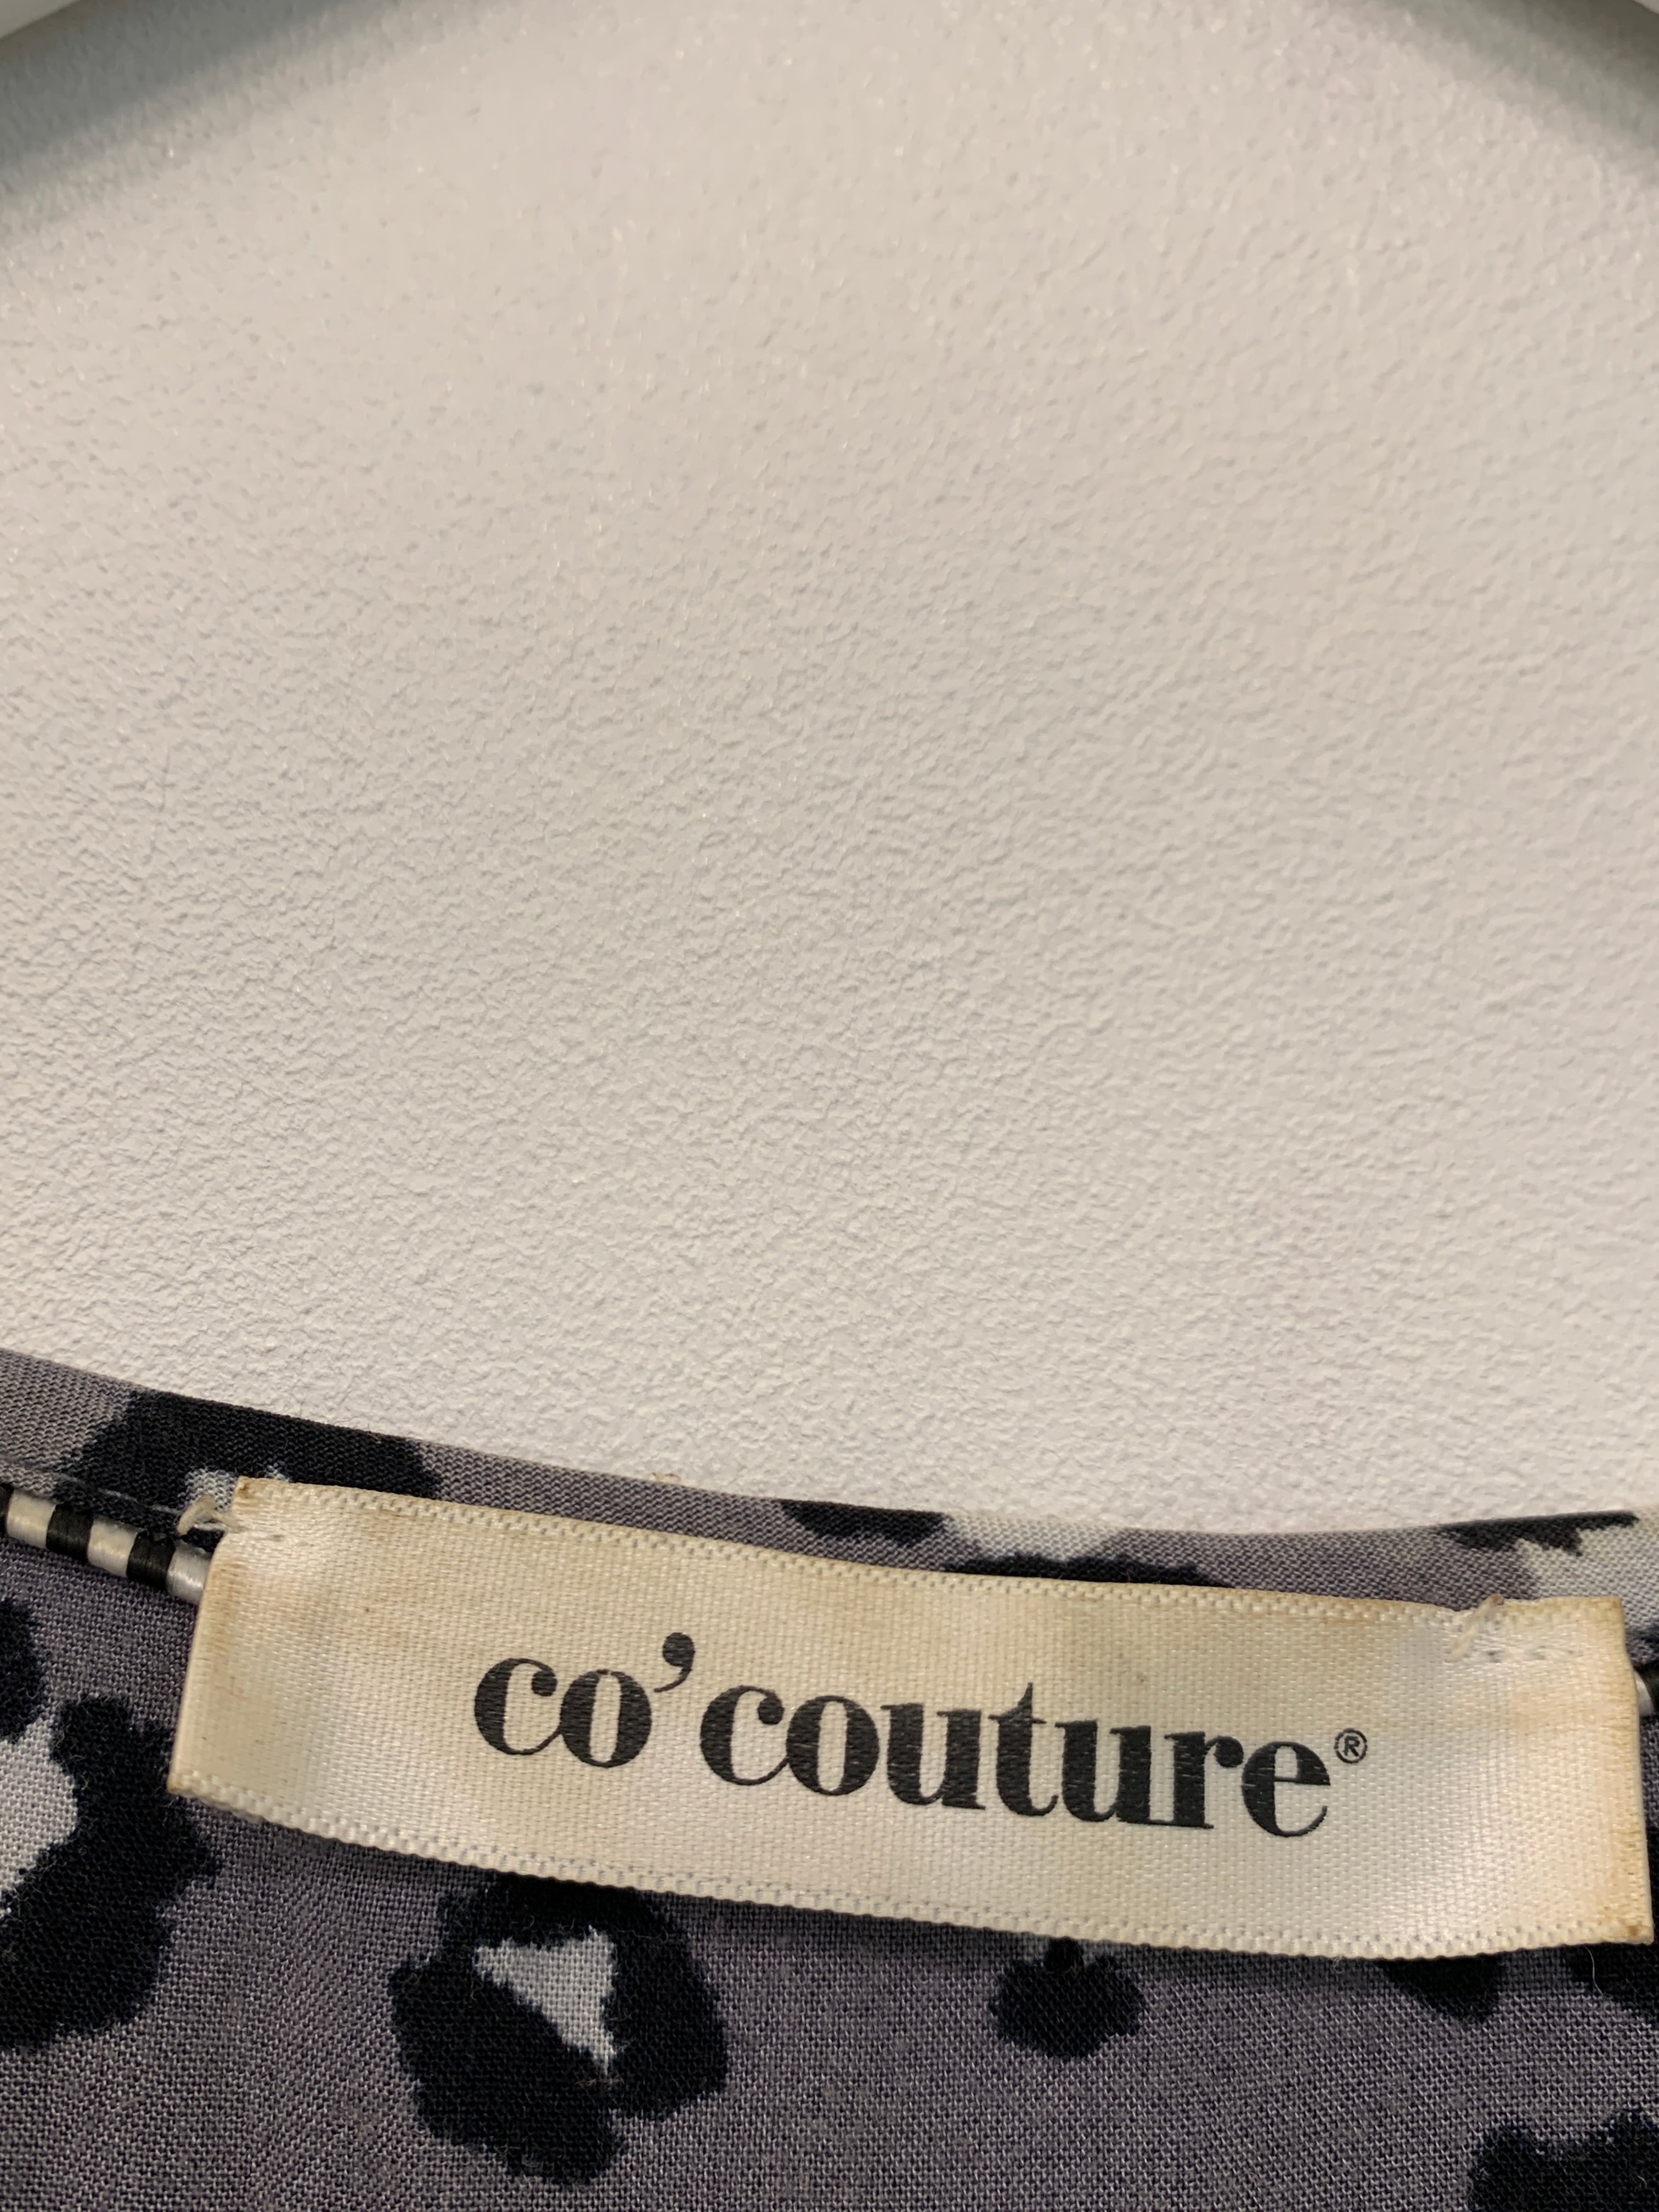 Co’Couture Bluse